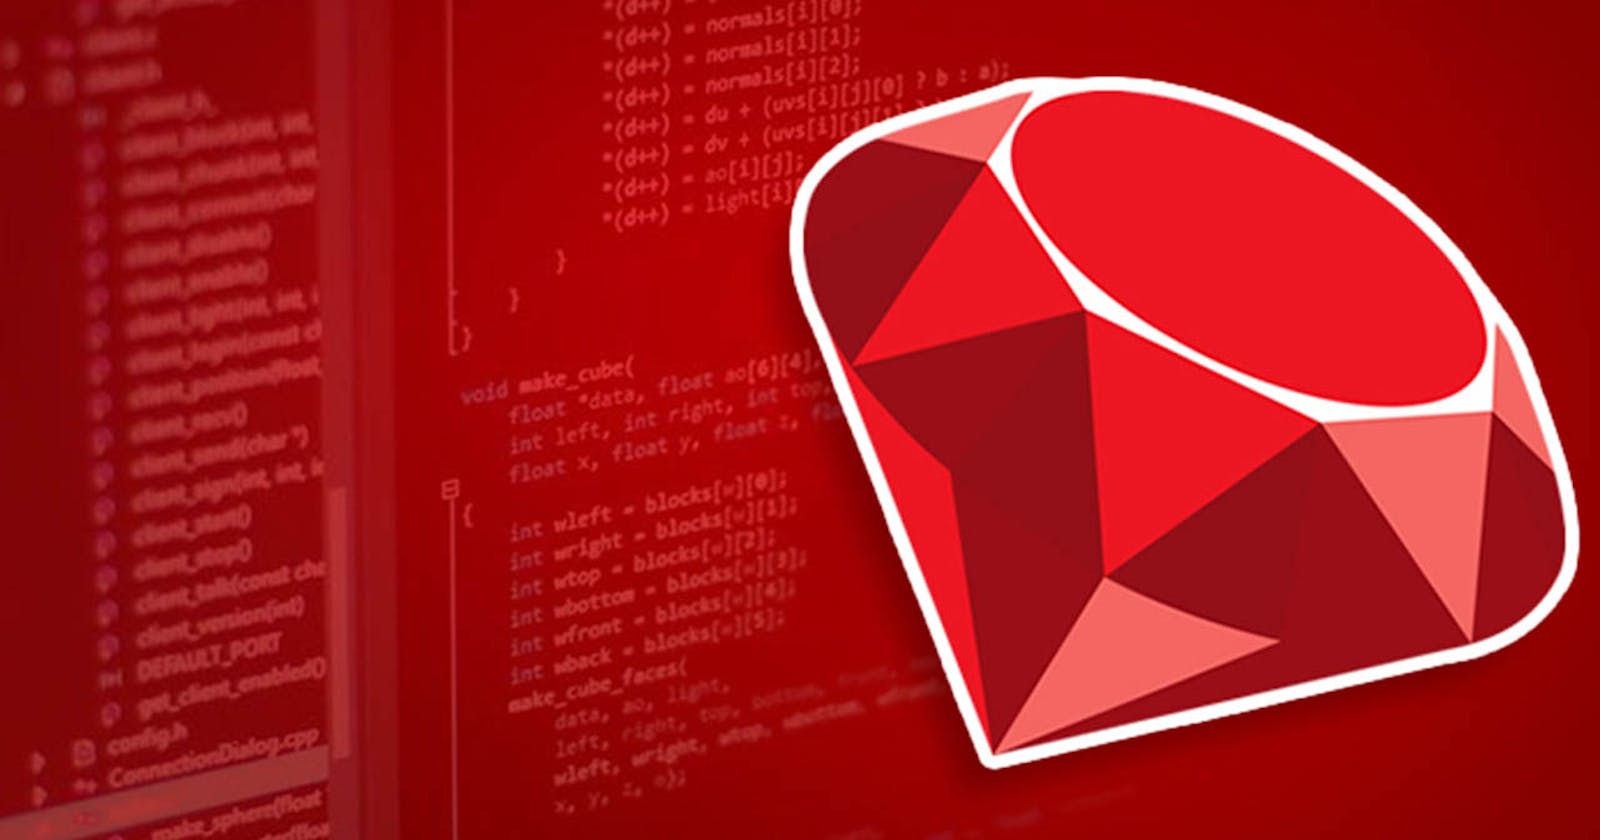 Enumerables and Iterators in Ruby